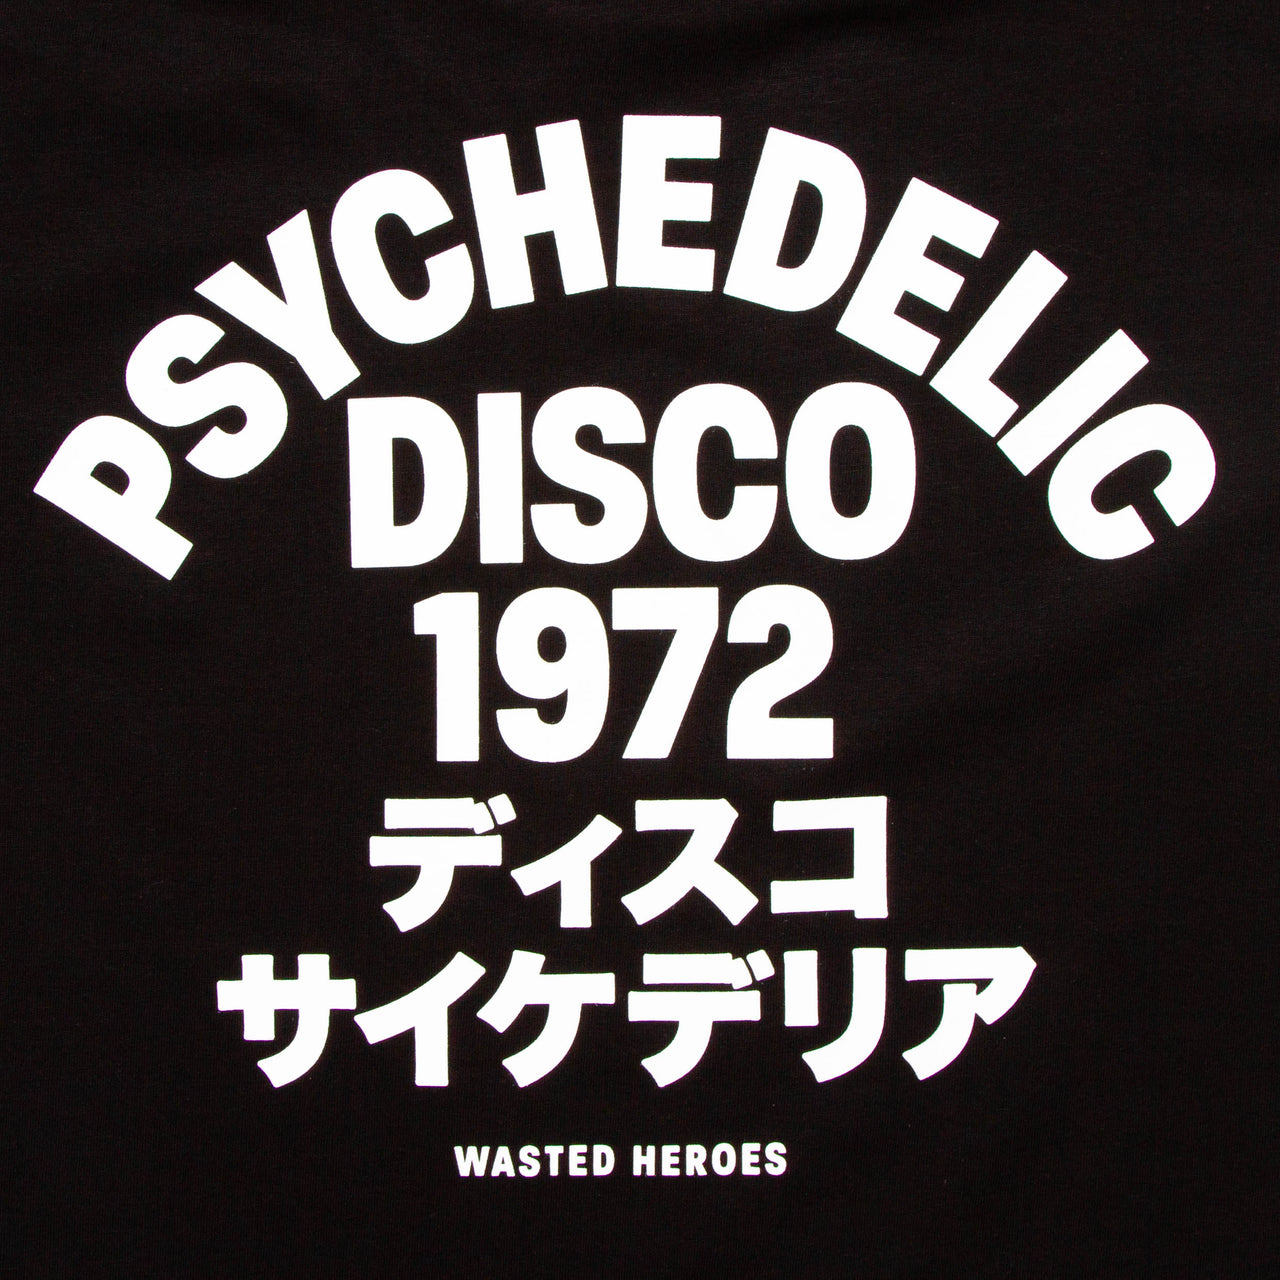 1972 Psychedelic Disco Front Print - Tshirt - Black